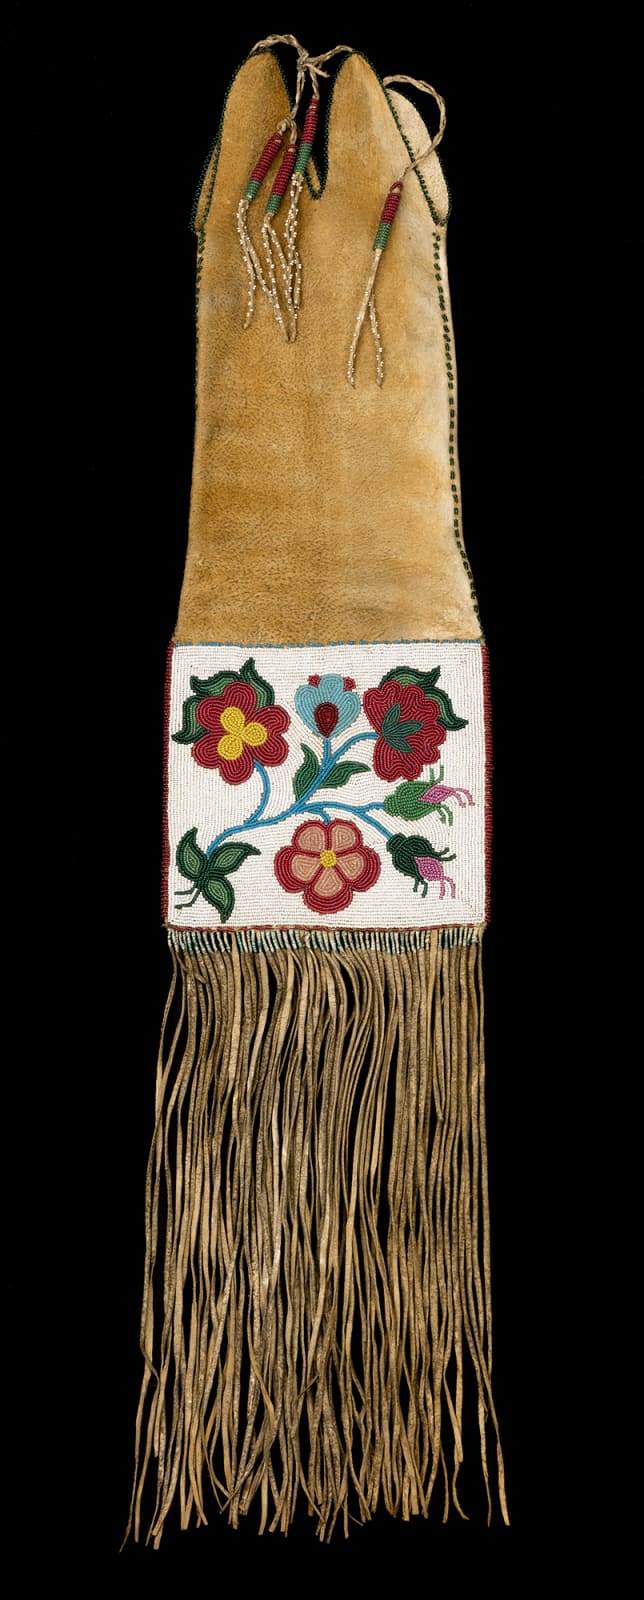 UNIDENTIFIED CREE ARTIST Beaded Pipe Bag, c. 1870 hide, glass beads, and thread, 30 x 6.5 x 2.25 in (76.2 x 16.5 x 5.7 cm)